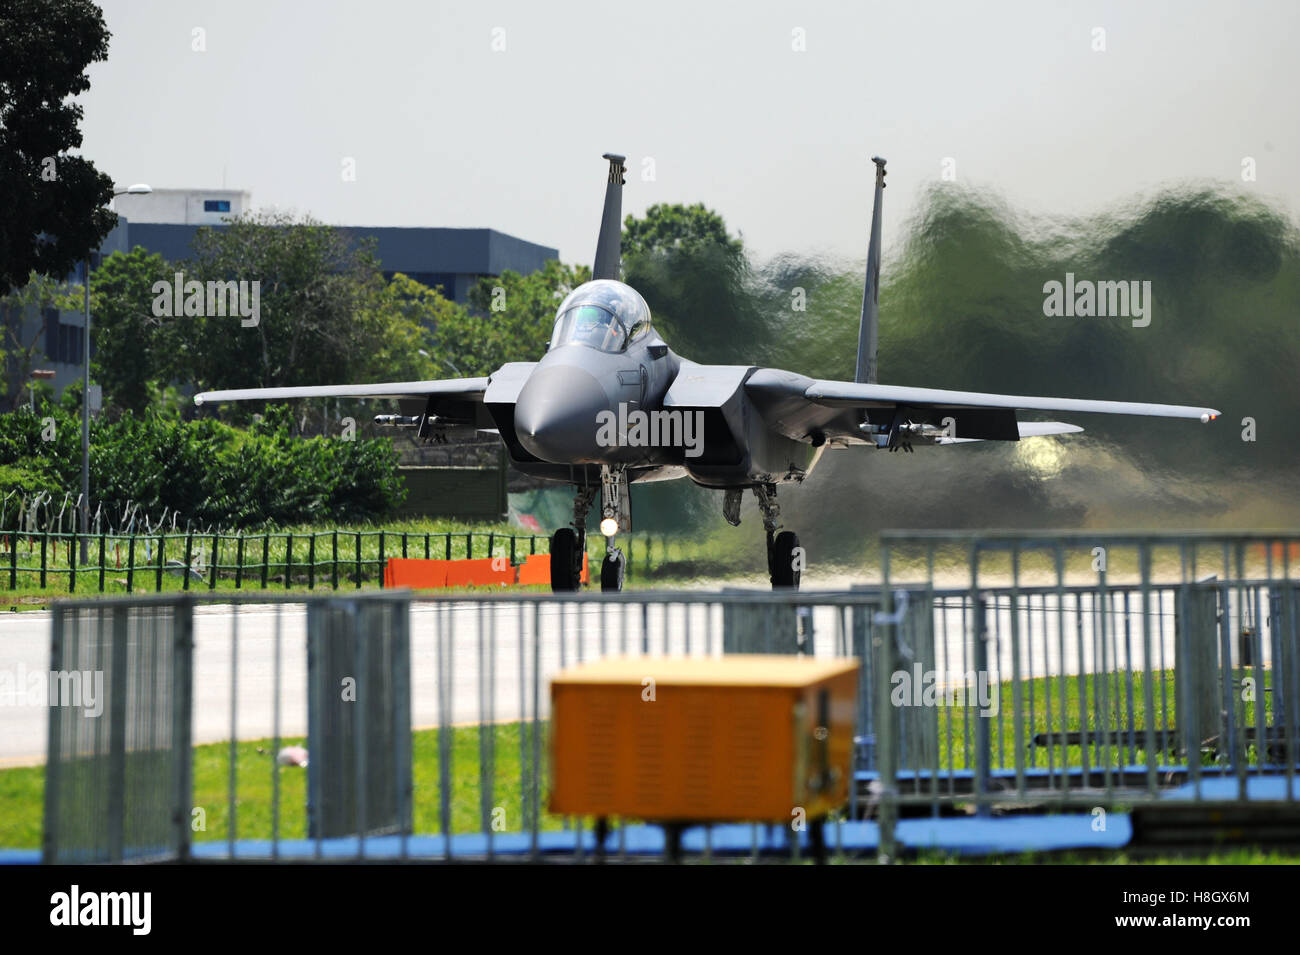 Singapore. 12th Nov, 2016. An F-15SG fighter plane of the Republic of Singapore Air Force (RSAF) prepares to take off during a rehearsal of exercise Torrent on Singapore's Lim Chu Kang road, Nov. 12, 2016. The Republic of Singapore Air Force (RSAF) Sunday conducted exercise Torrent, in which a public road was converted into a runway for aircraft take-off and landing. The alternate runway exercise, which was last conducted in 2008 and now is in its seventh edition, aims to increase RSAF's aircraft take-off and landing capability. © Then Chih Wey/Xinhua/Alamy Live News Stock Photo